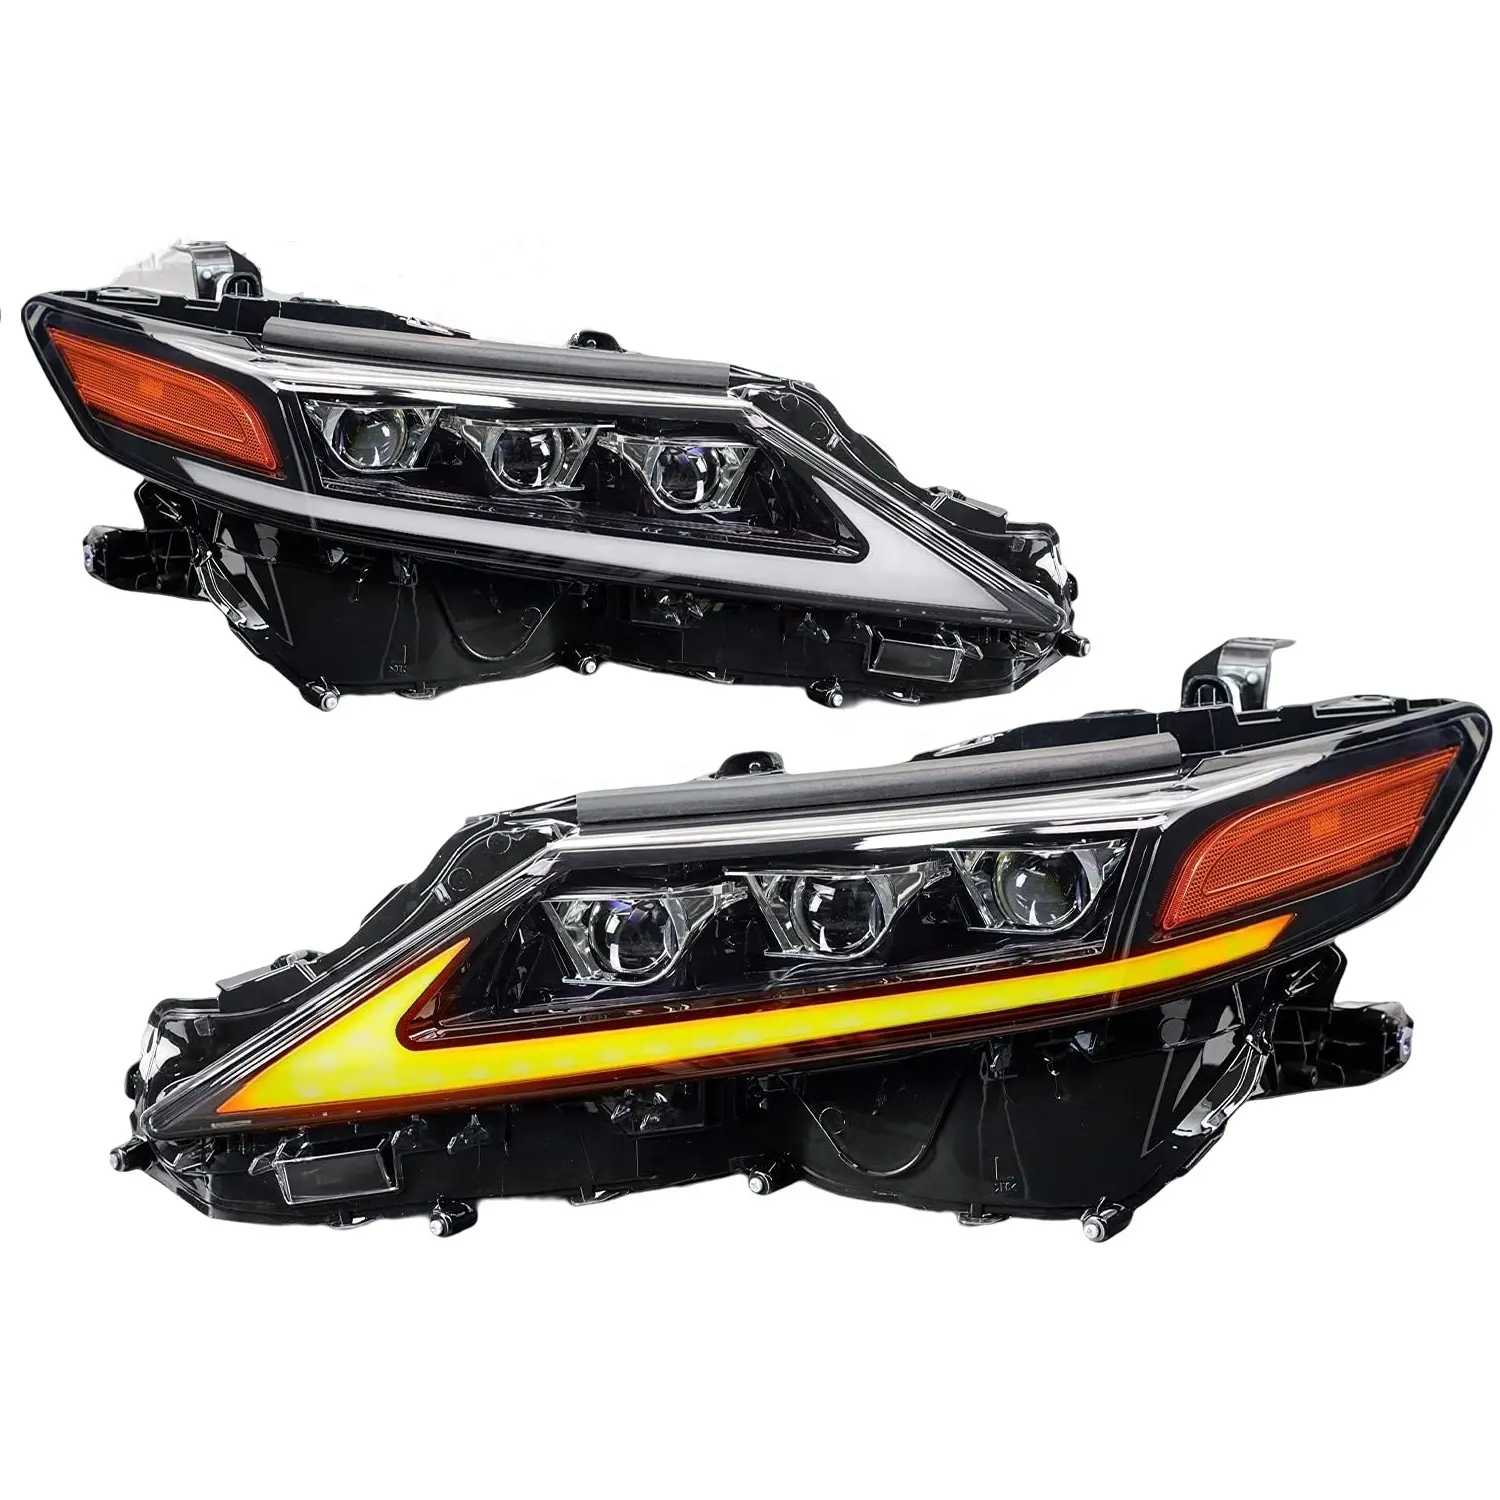 Auto Lighting system Brightest High Low Beam DRL Car Head Lamp For Toyota Camry 2018 2019 2020 2021 New Led Light Headlight